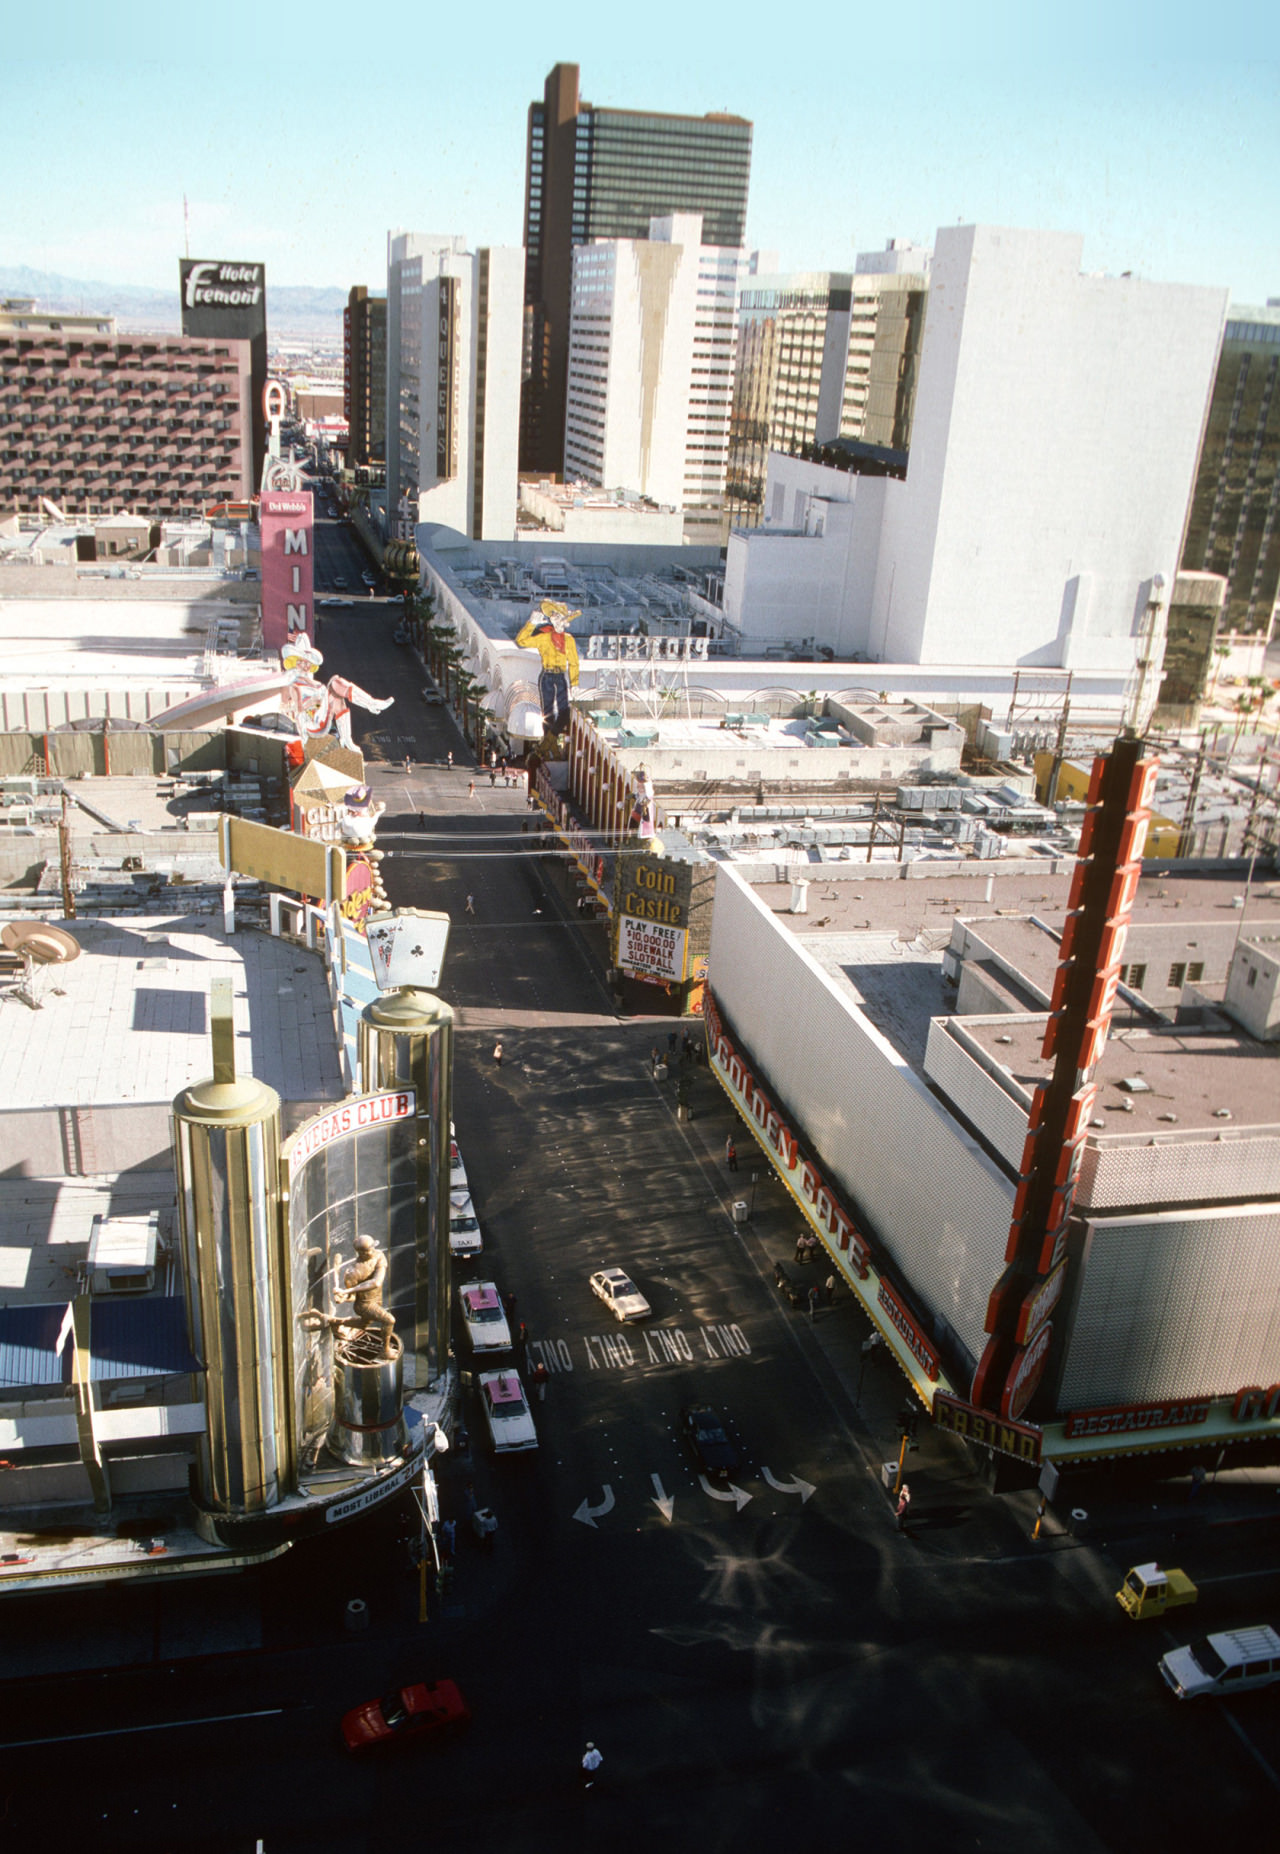 Fremont & Main – view from the top of Plaza Hotel.